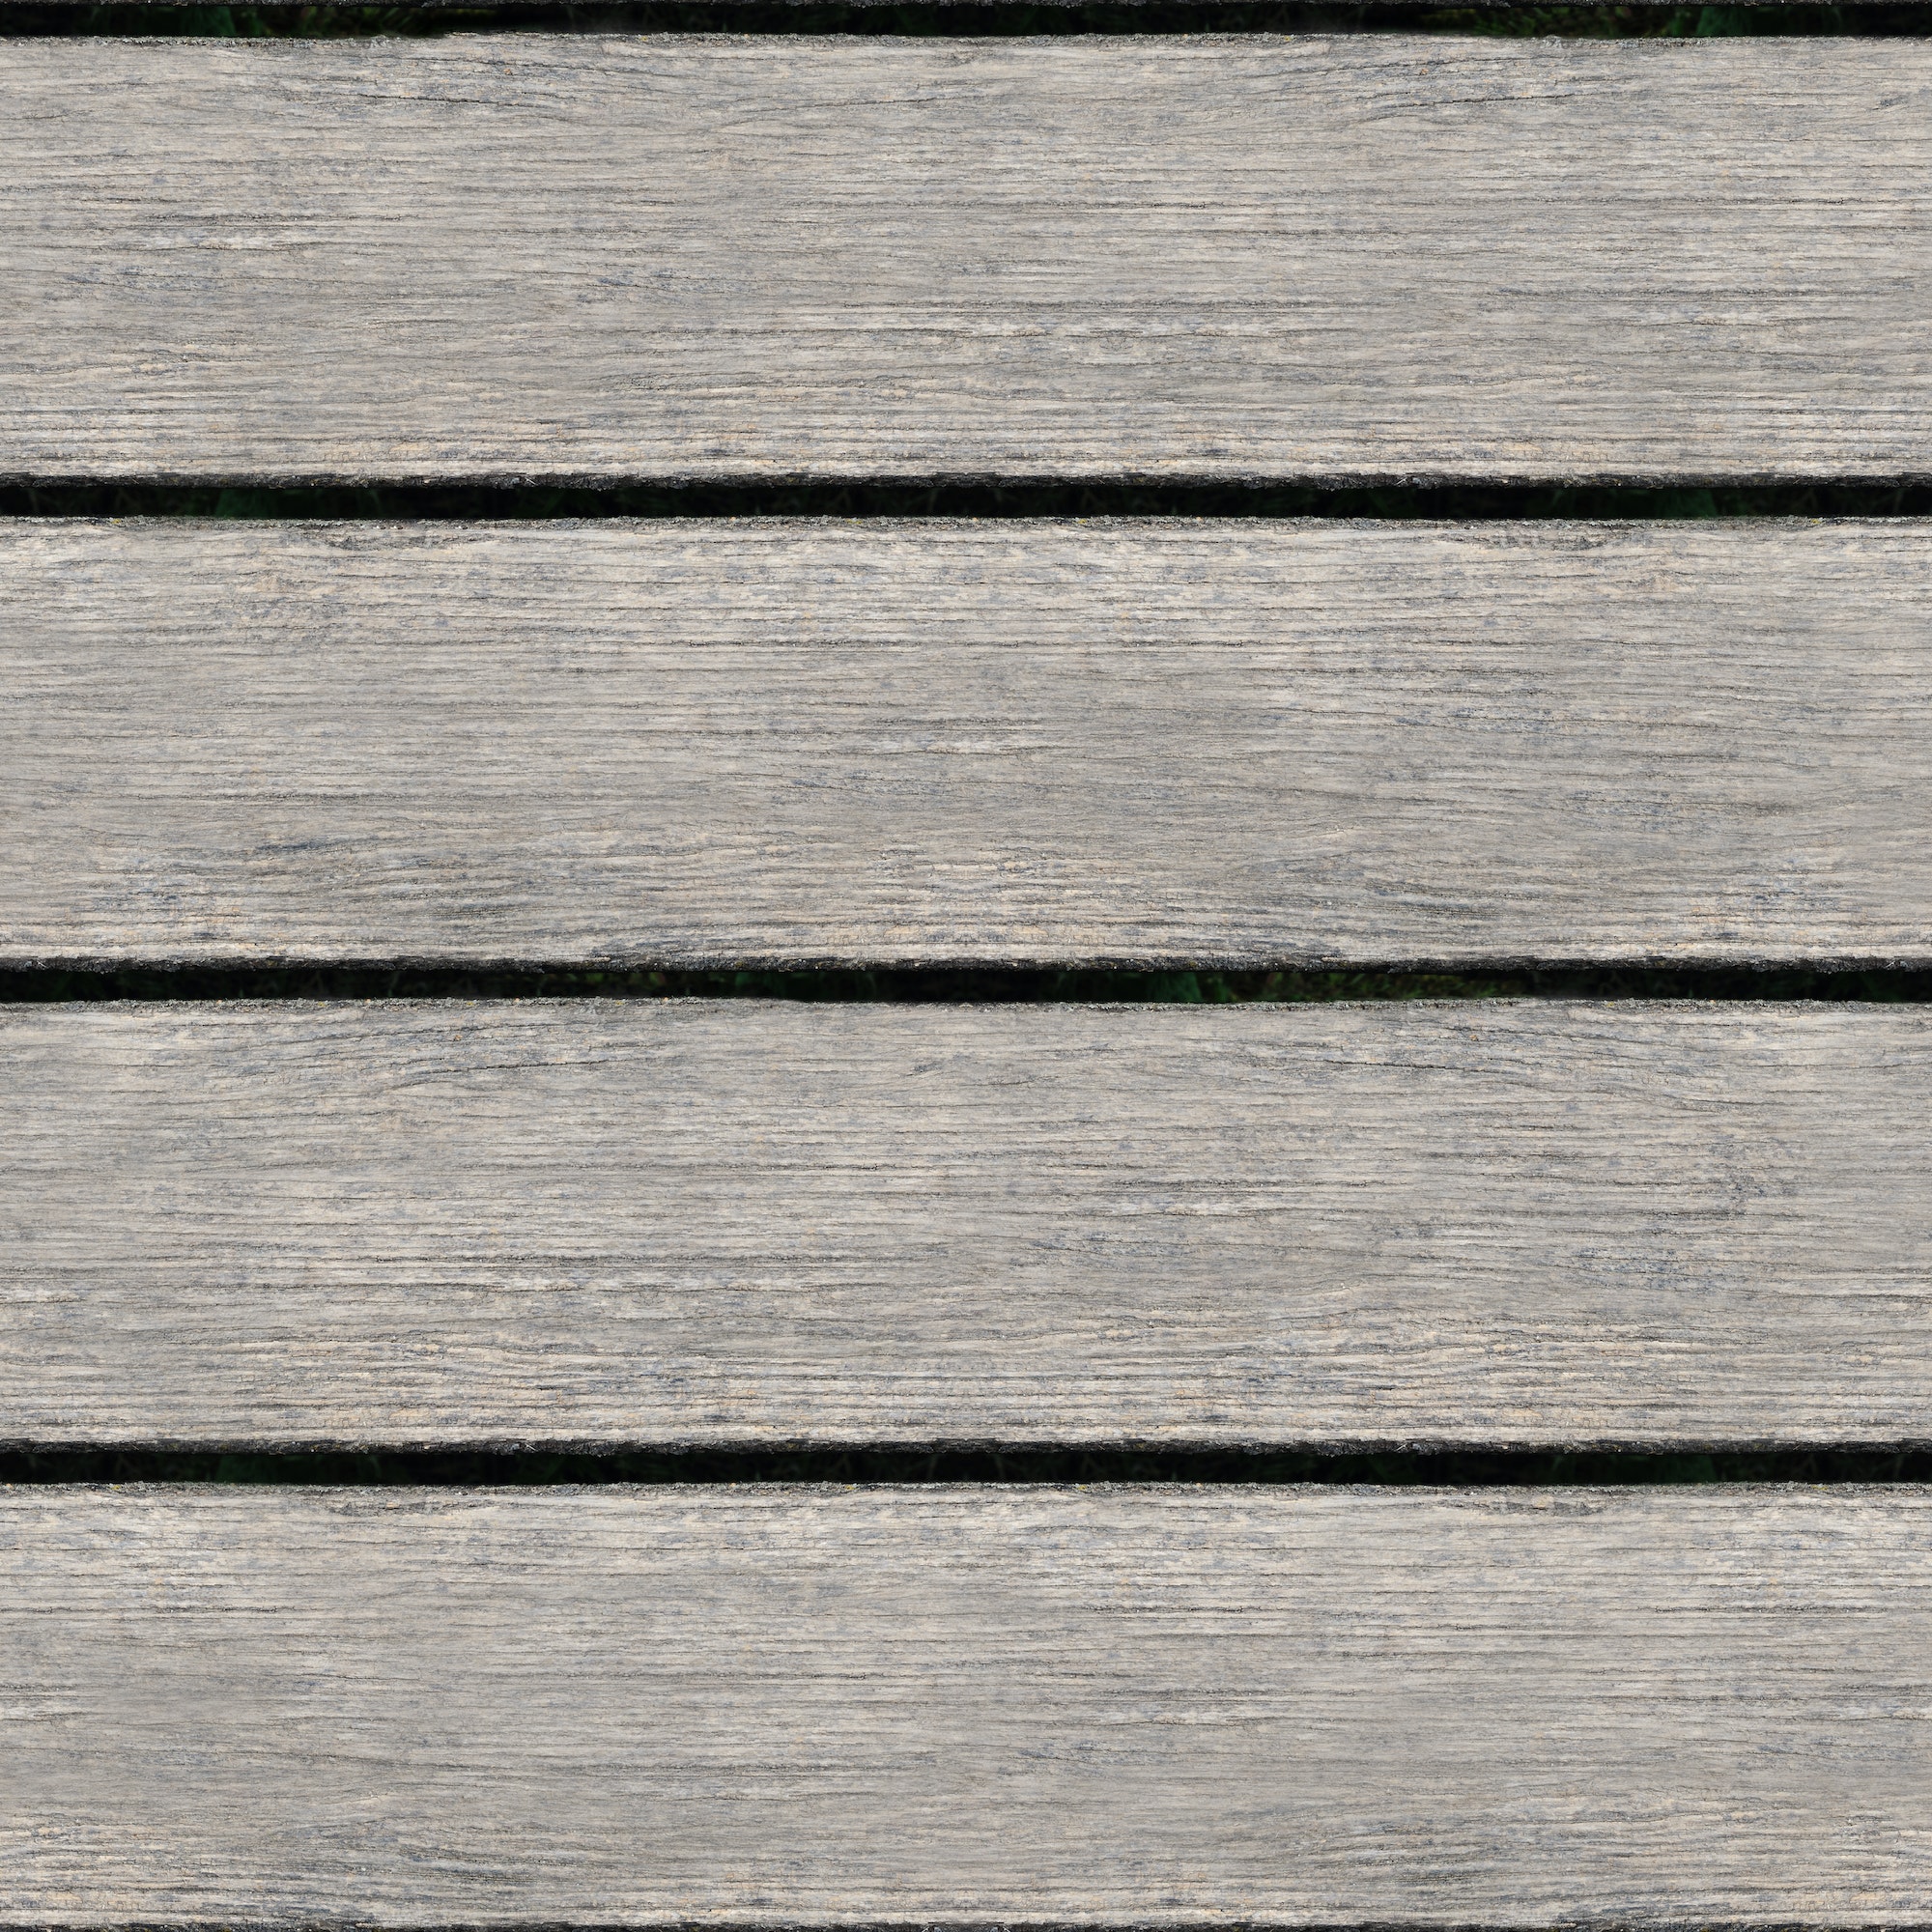 Seamless texture of wooden planks